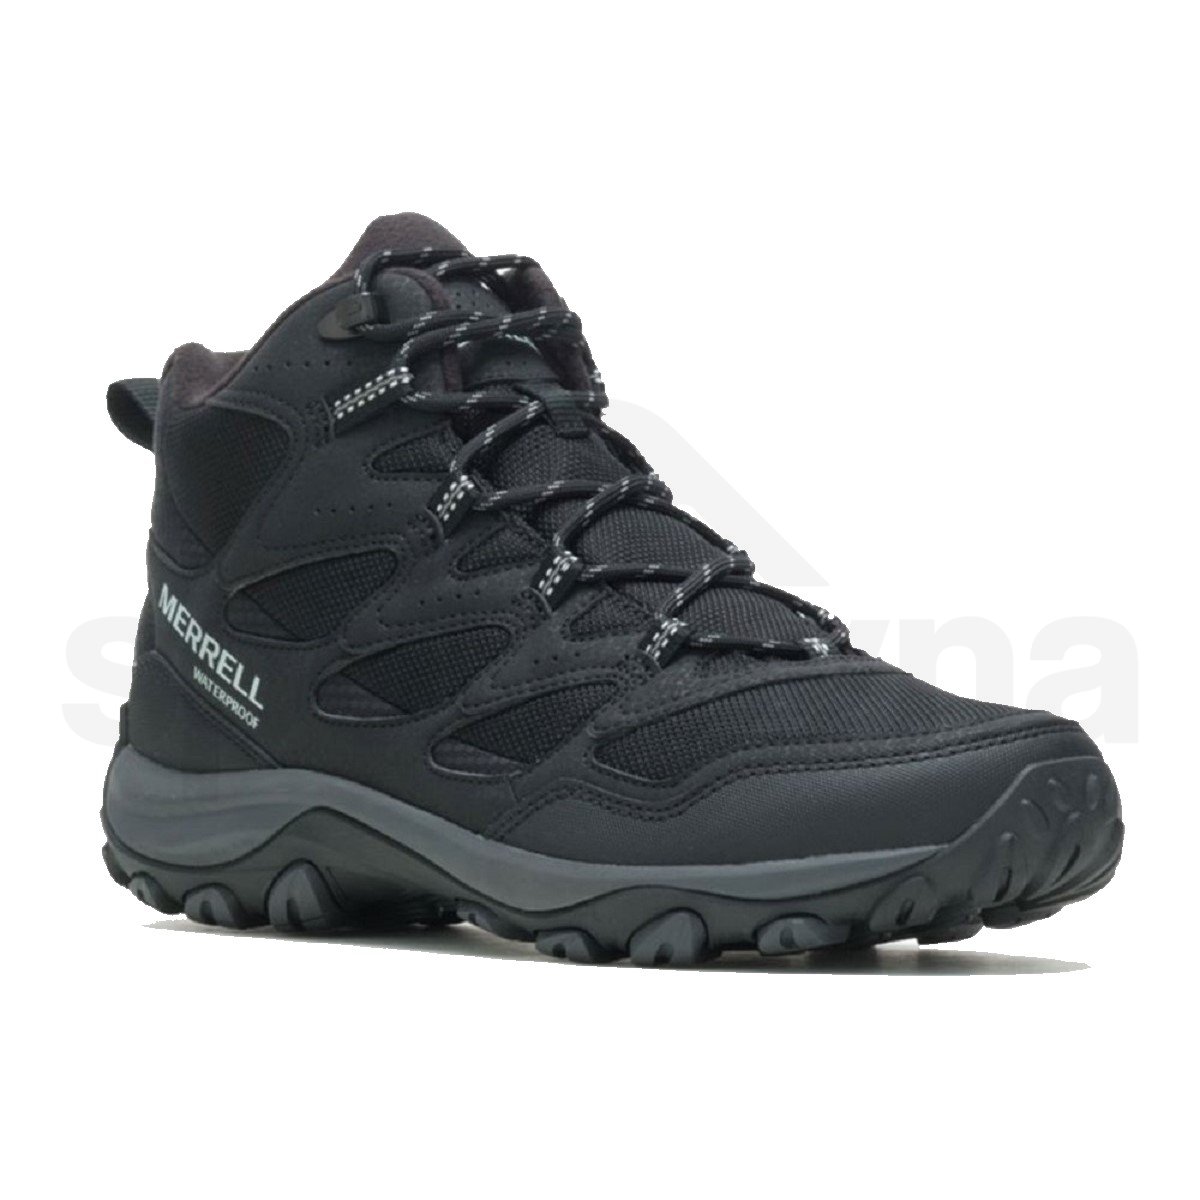 Merrell_West_Rim_Sport_Thermo_Mid_WP_M_J036641